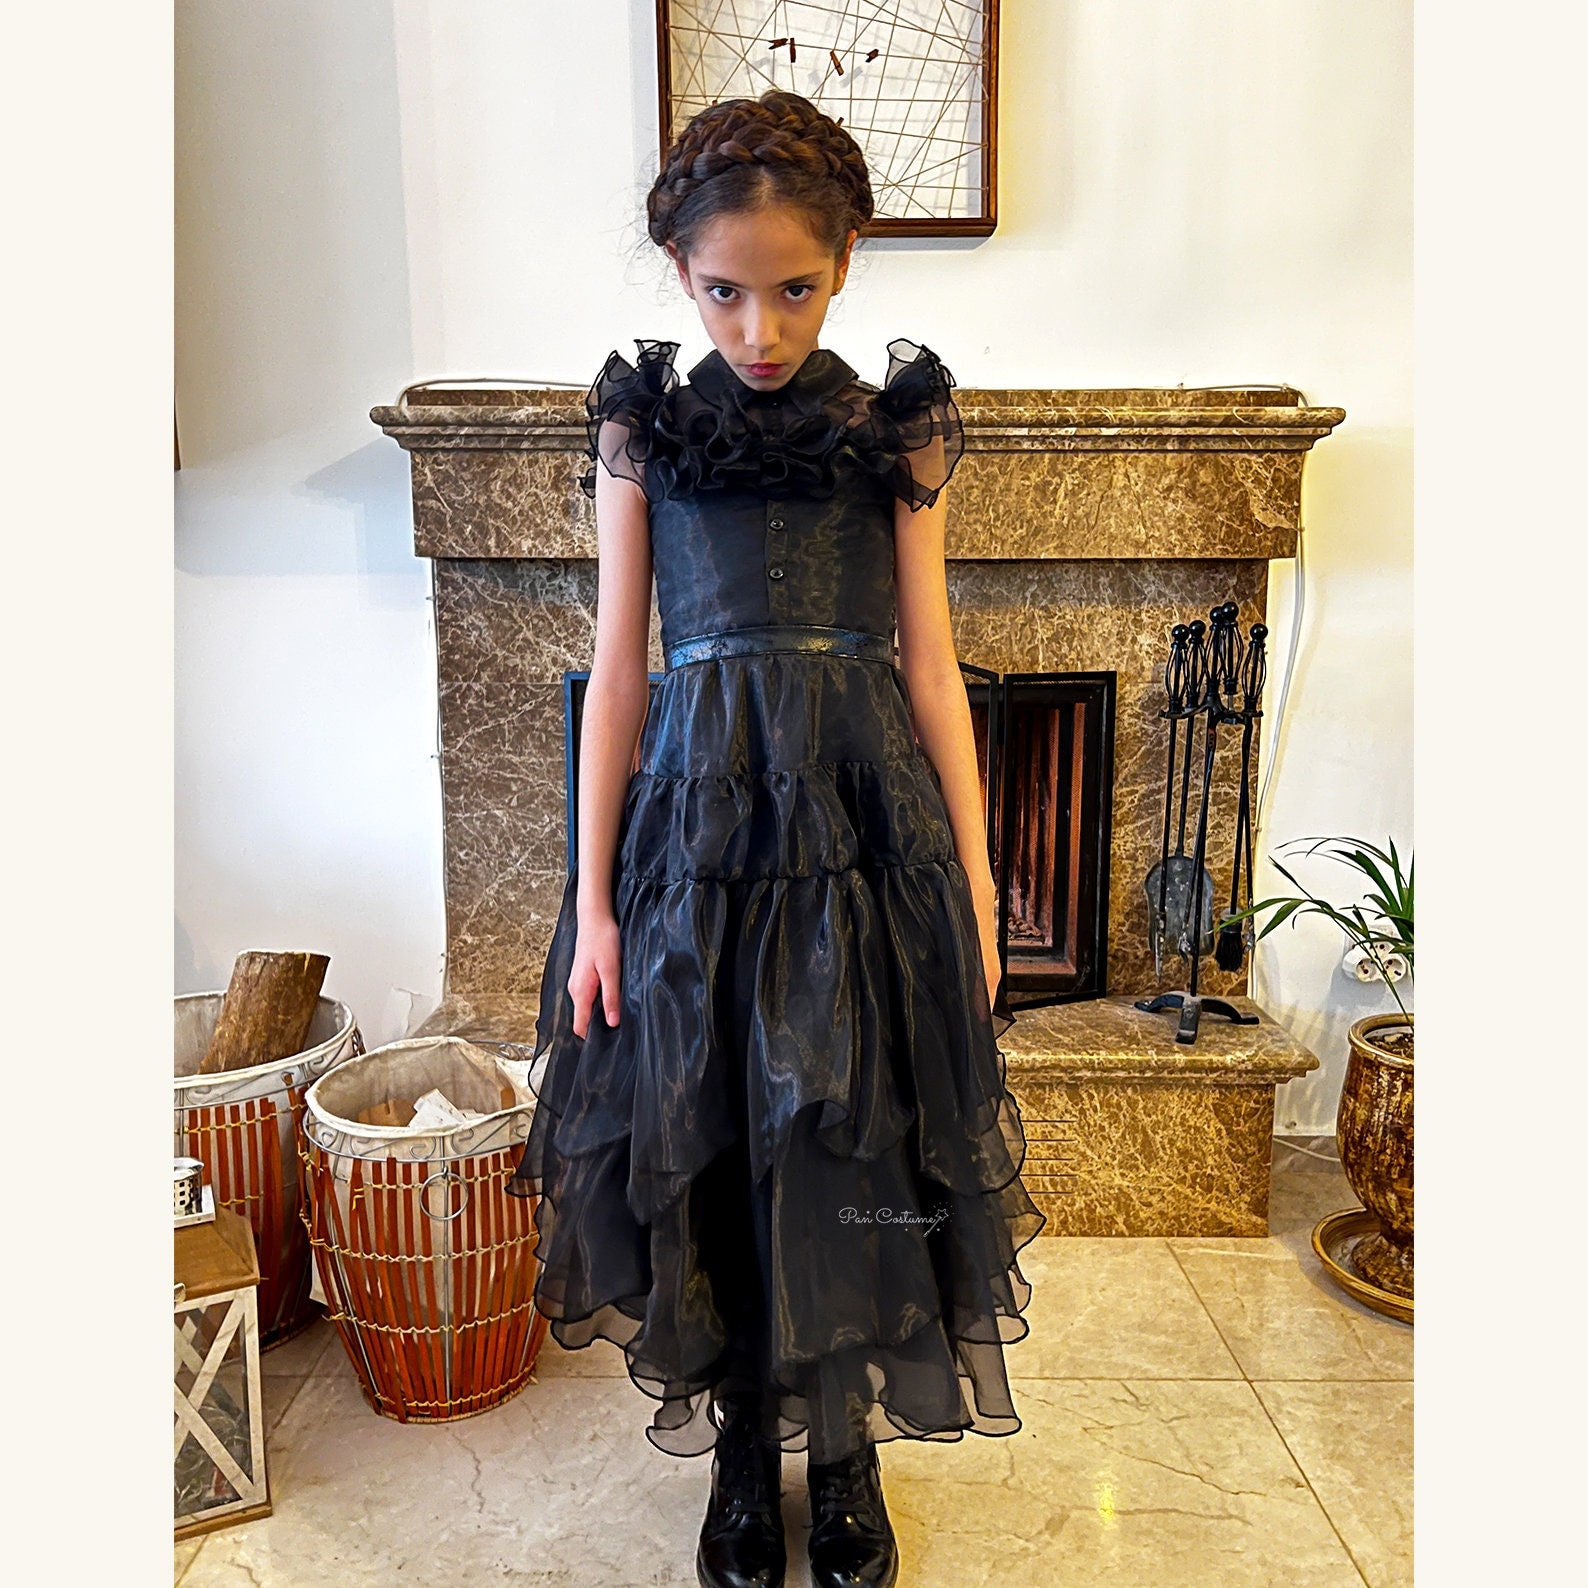 Wednesday Addams Costume for Kids • Life by Melissa